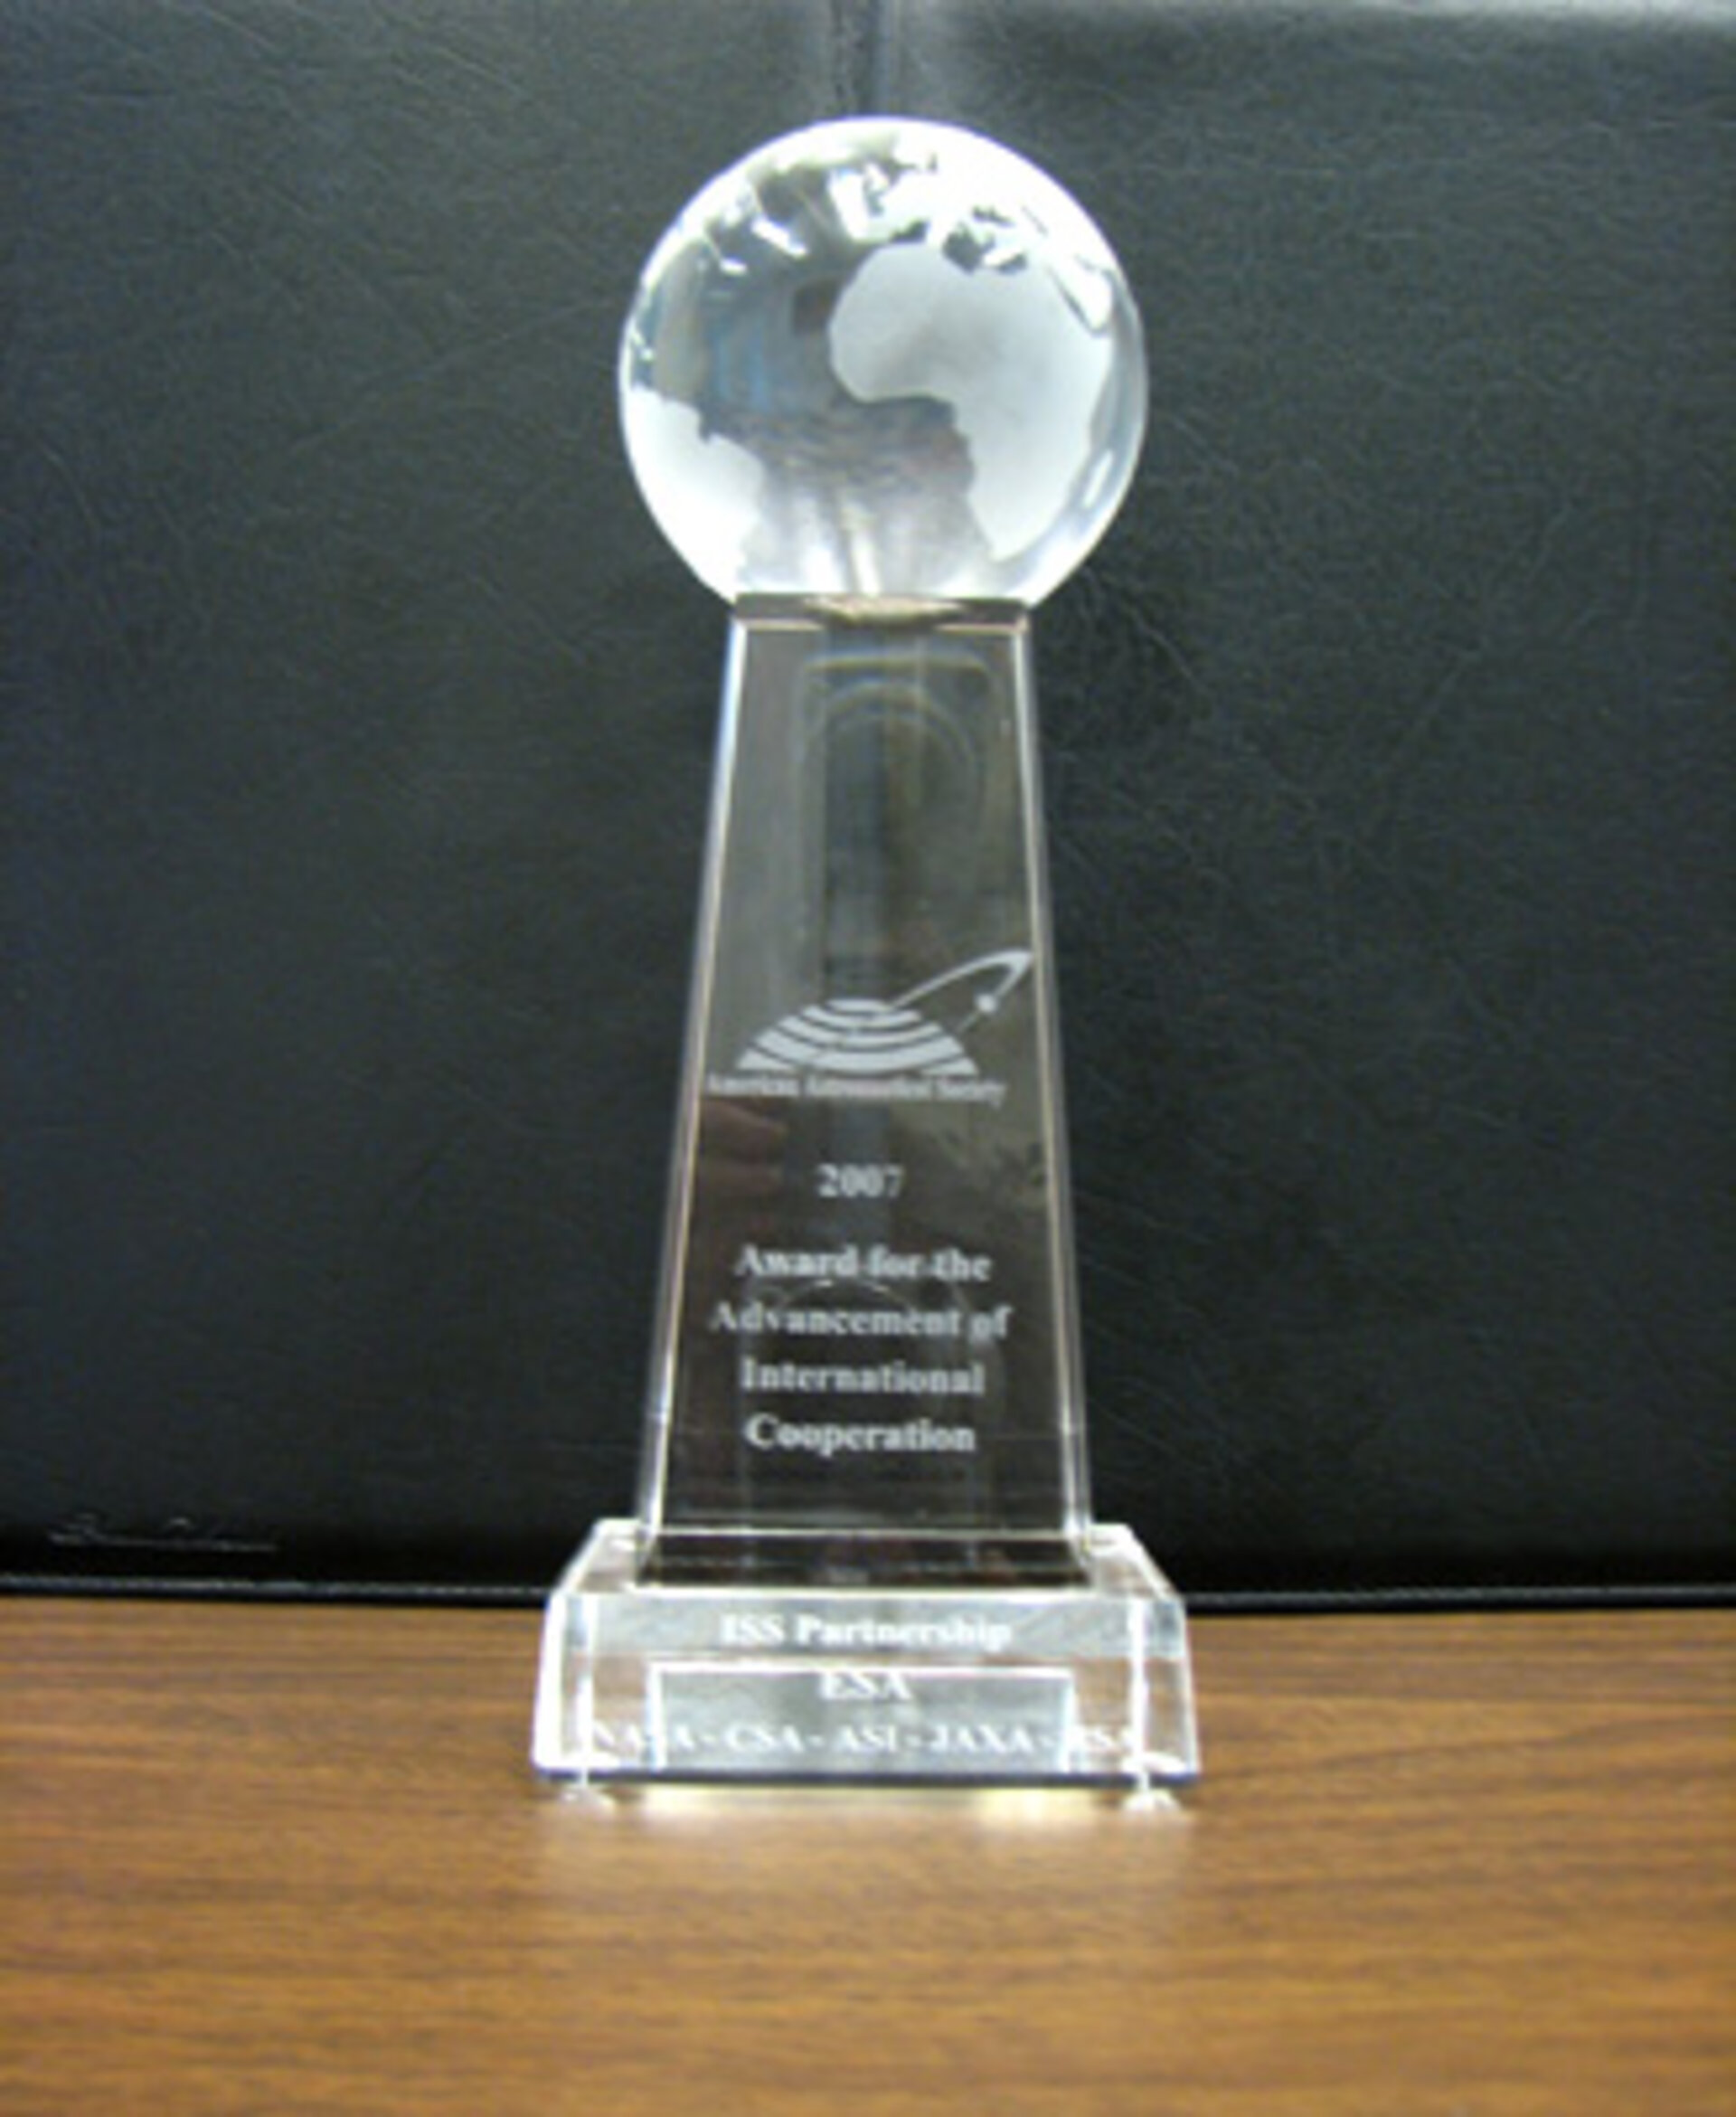 The AAS Advancement of International Cooperation Award